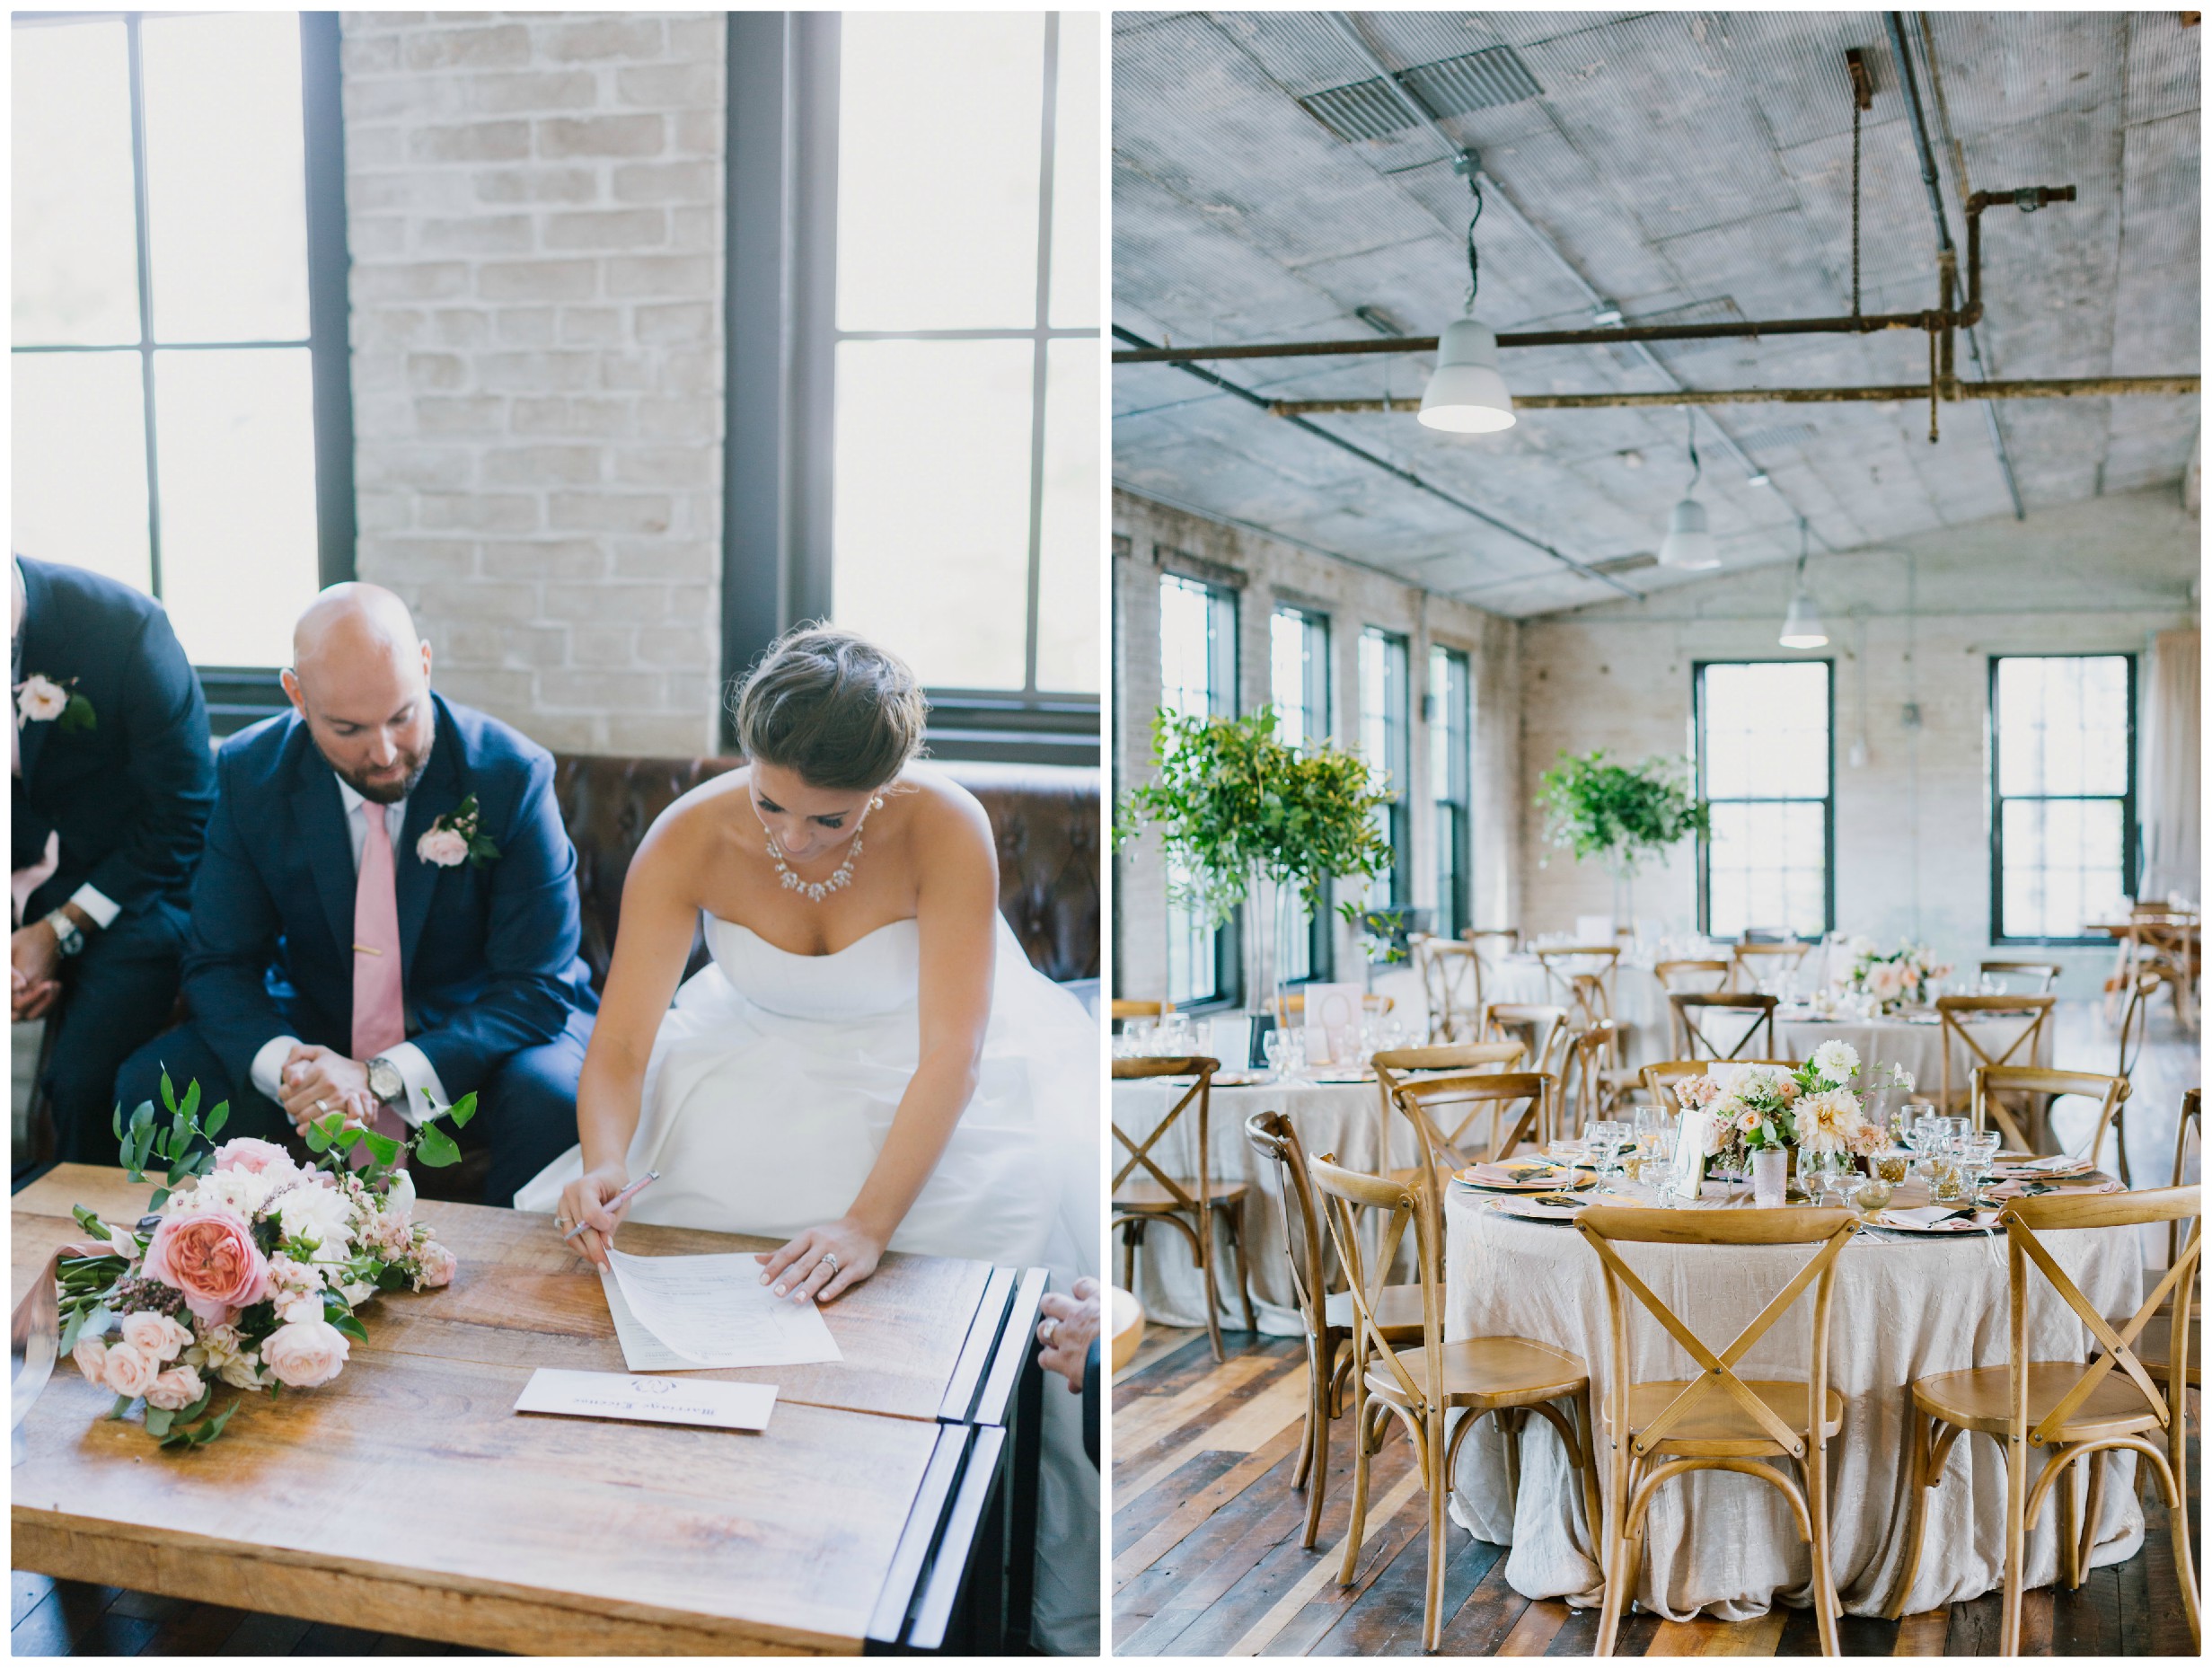 Blush Wedding | The Day's Design | Katie Grace Photography